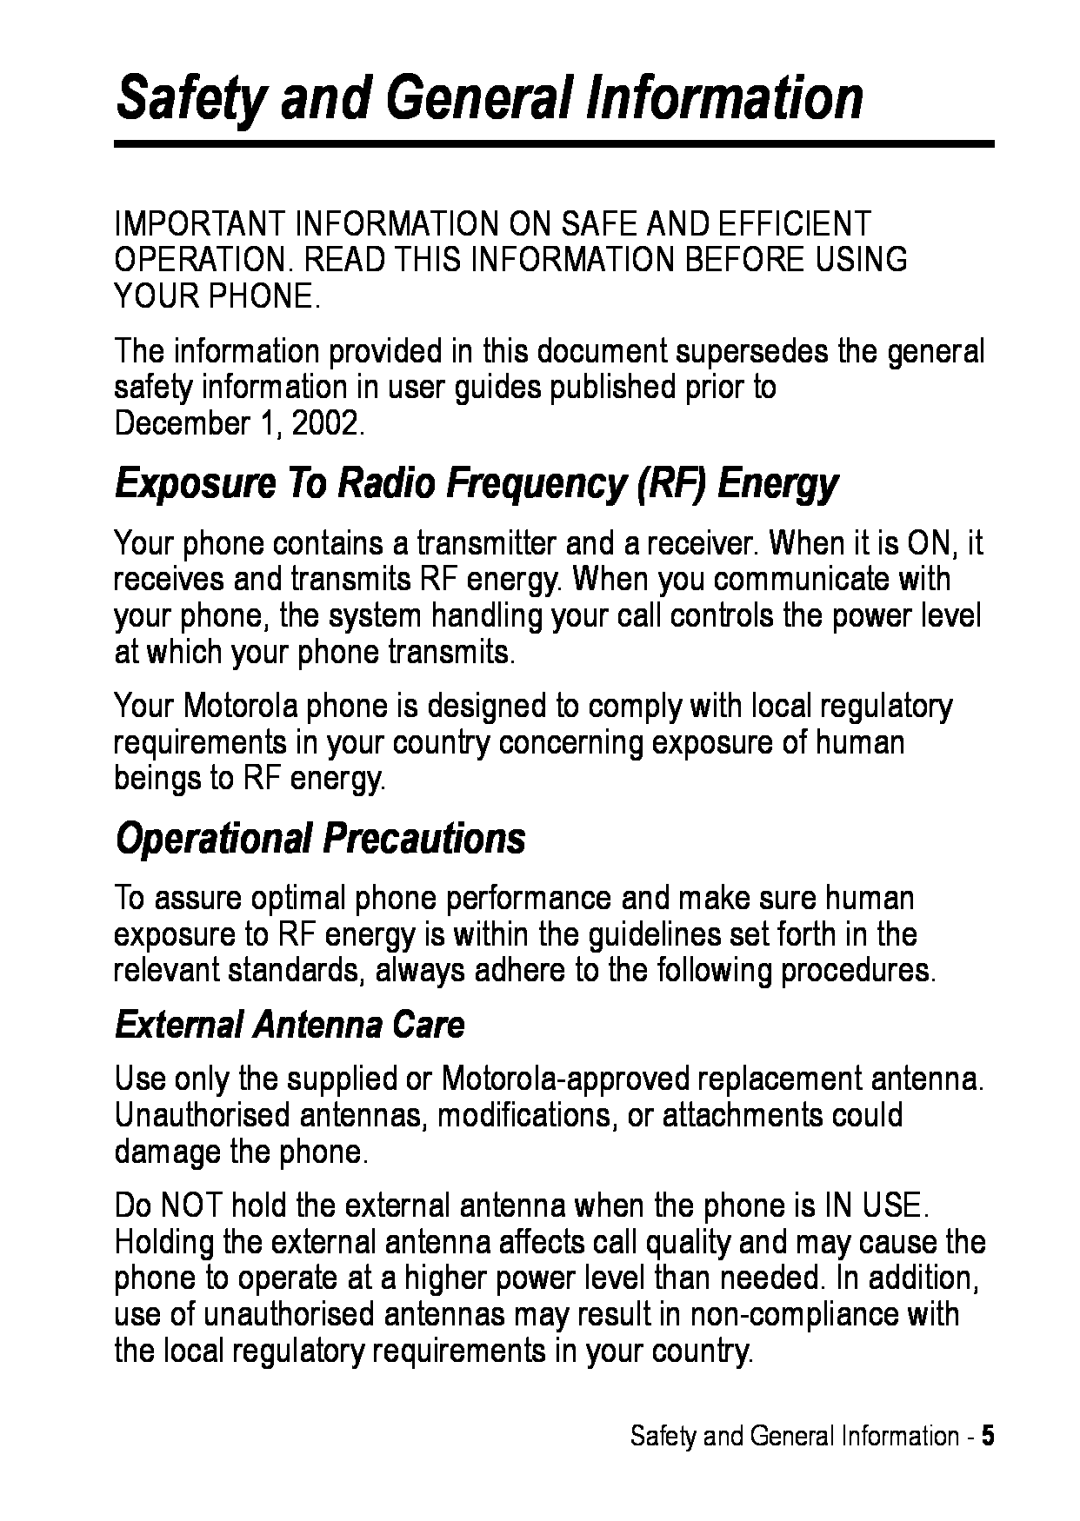 Motorola C390 manual Safety and General Information, Exposure To Radio Frequency RF Energy, Operational Precautions 